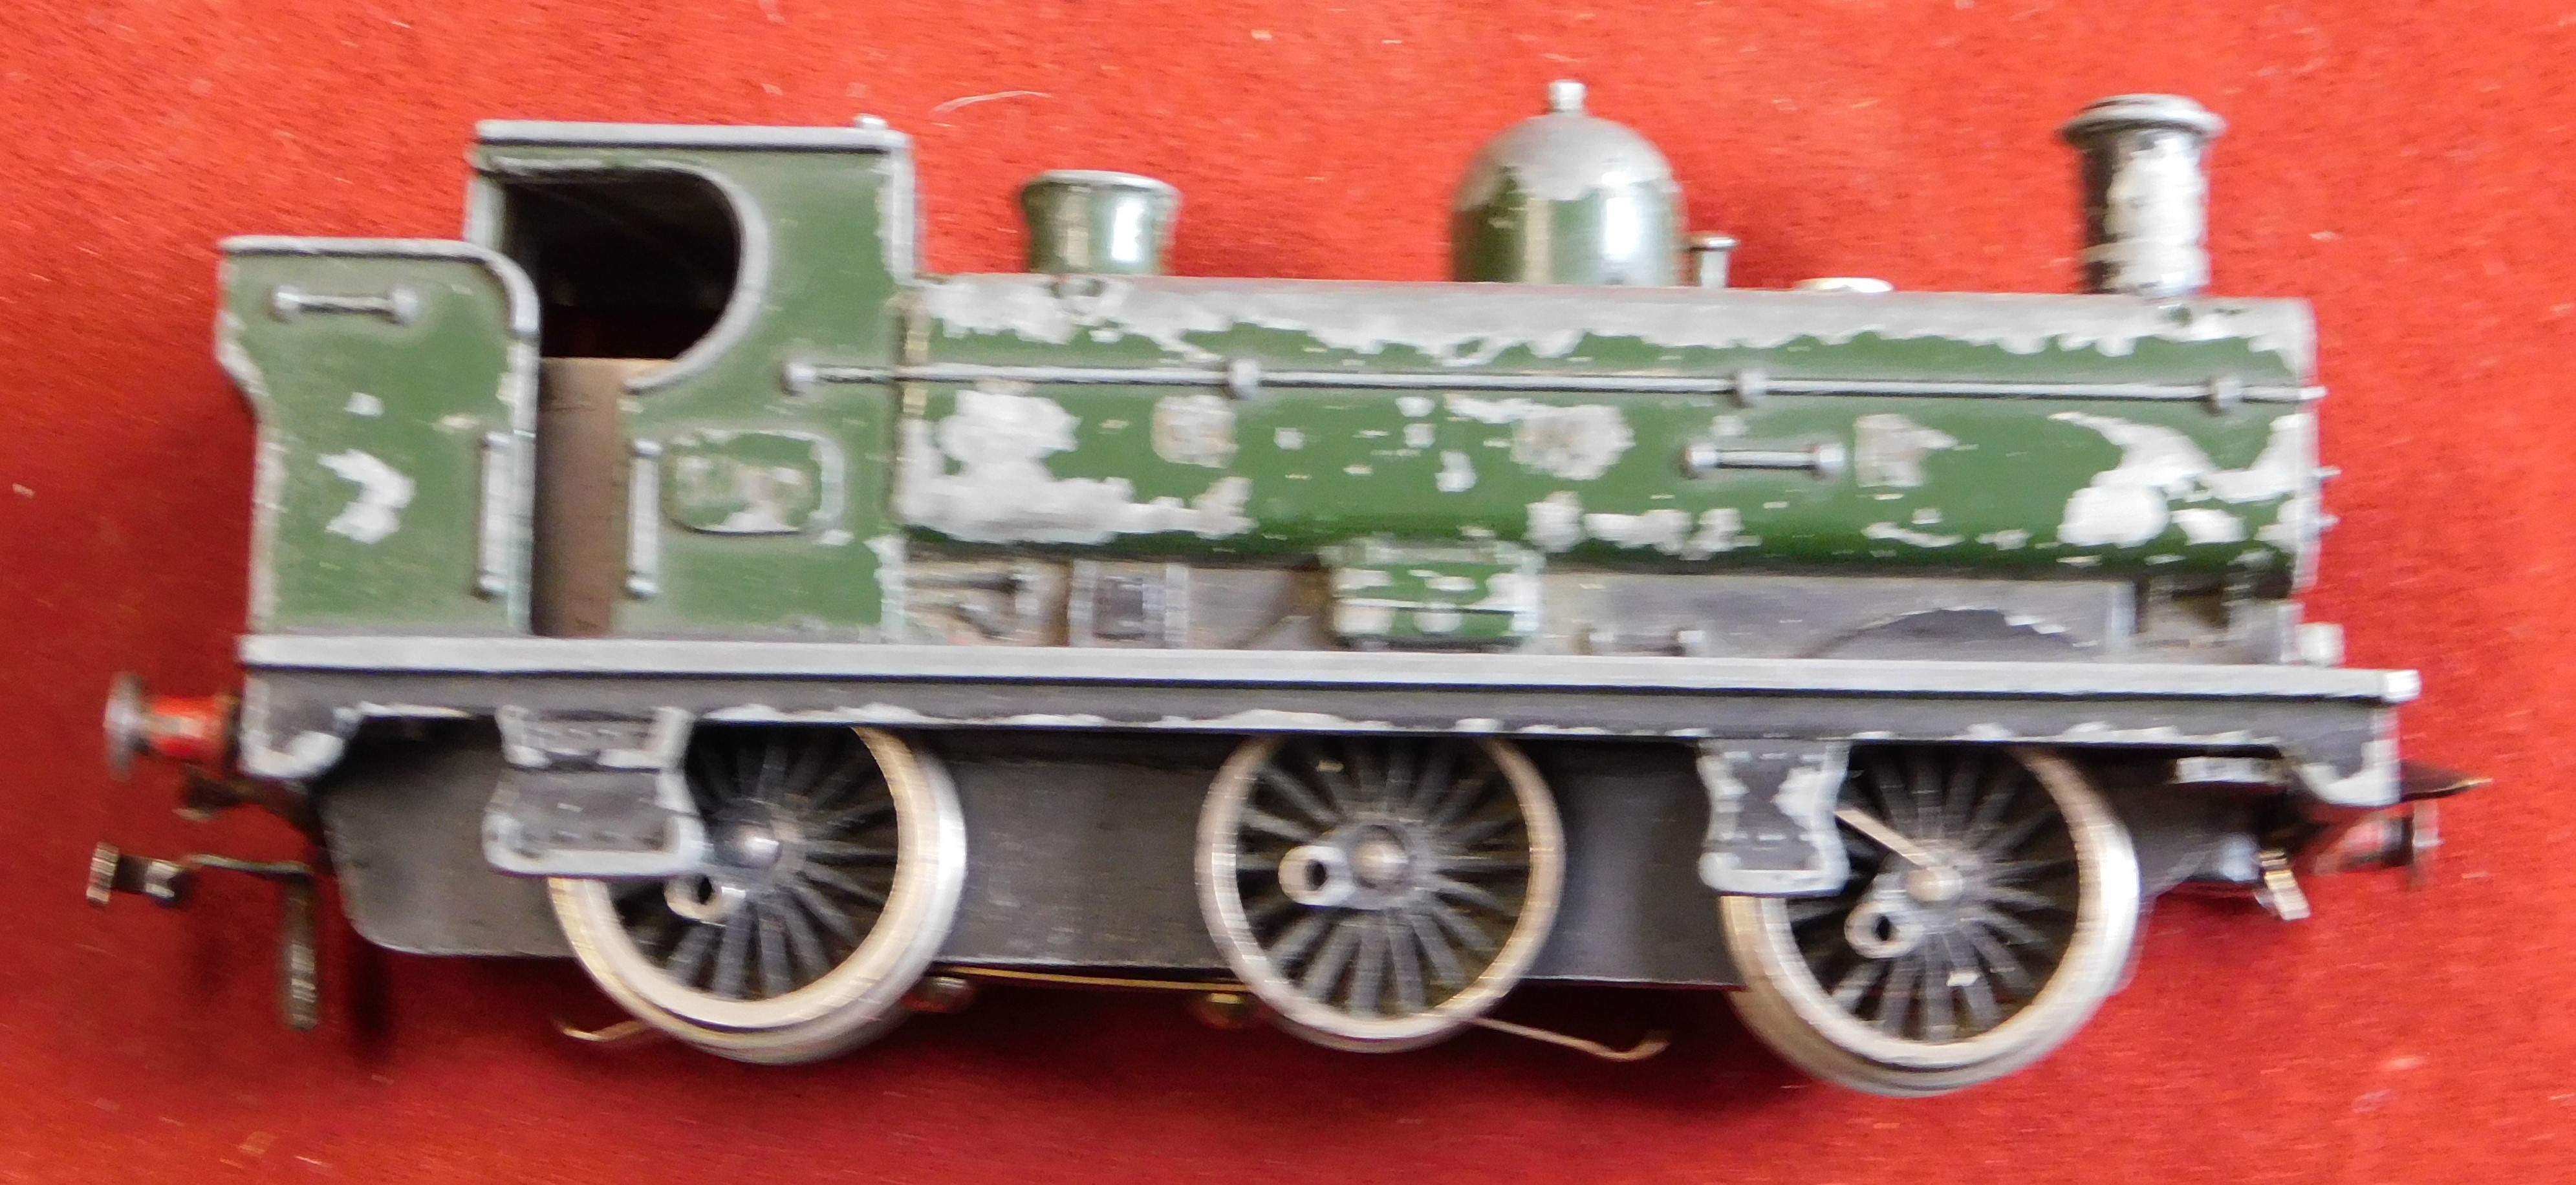 Hornby Dublo 'OO' Gauge 4x various locomotives, 4x various wagons and coaches - Image 4 of 6